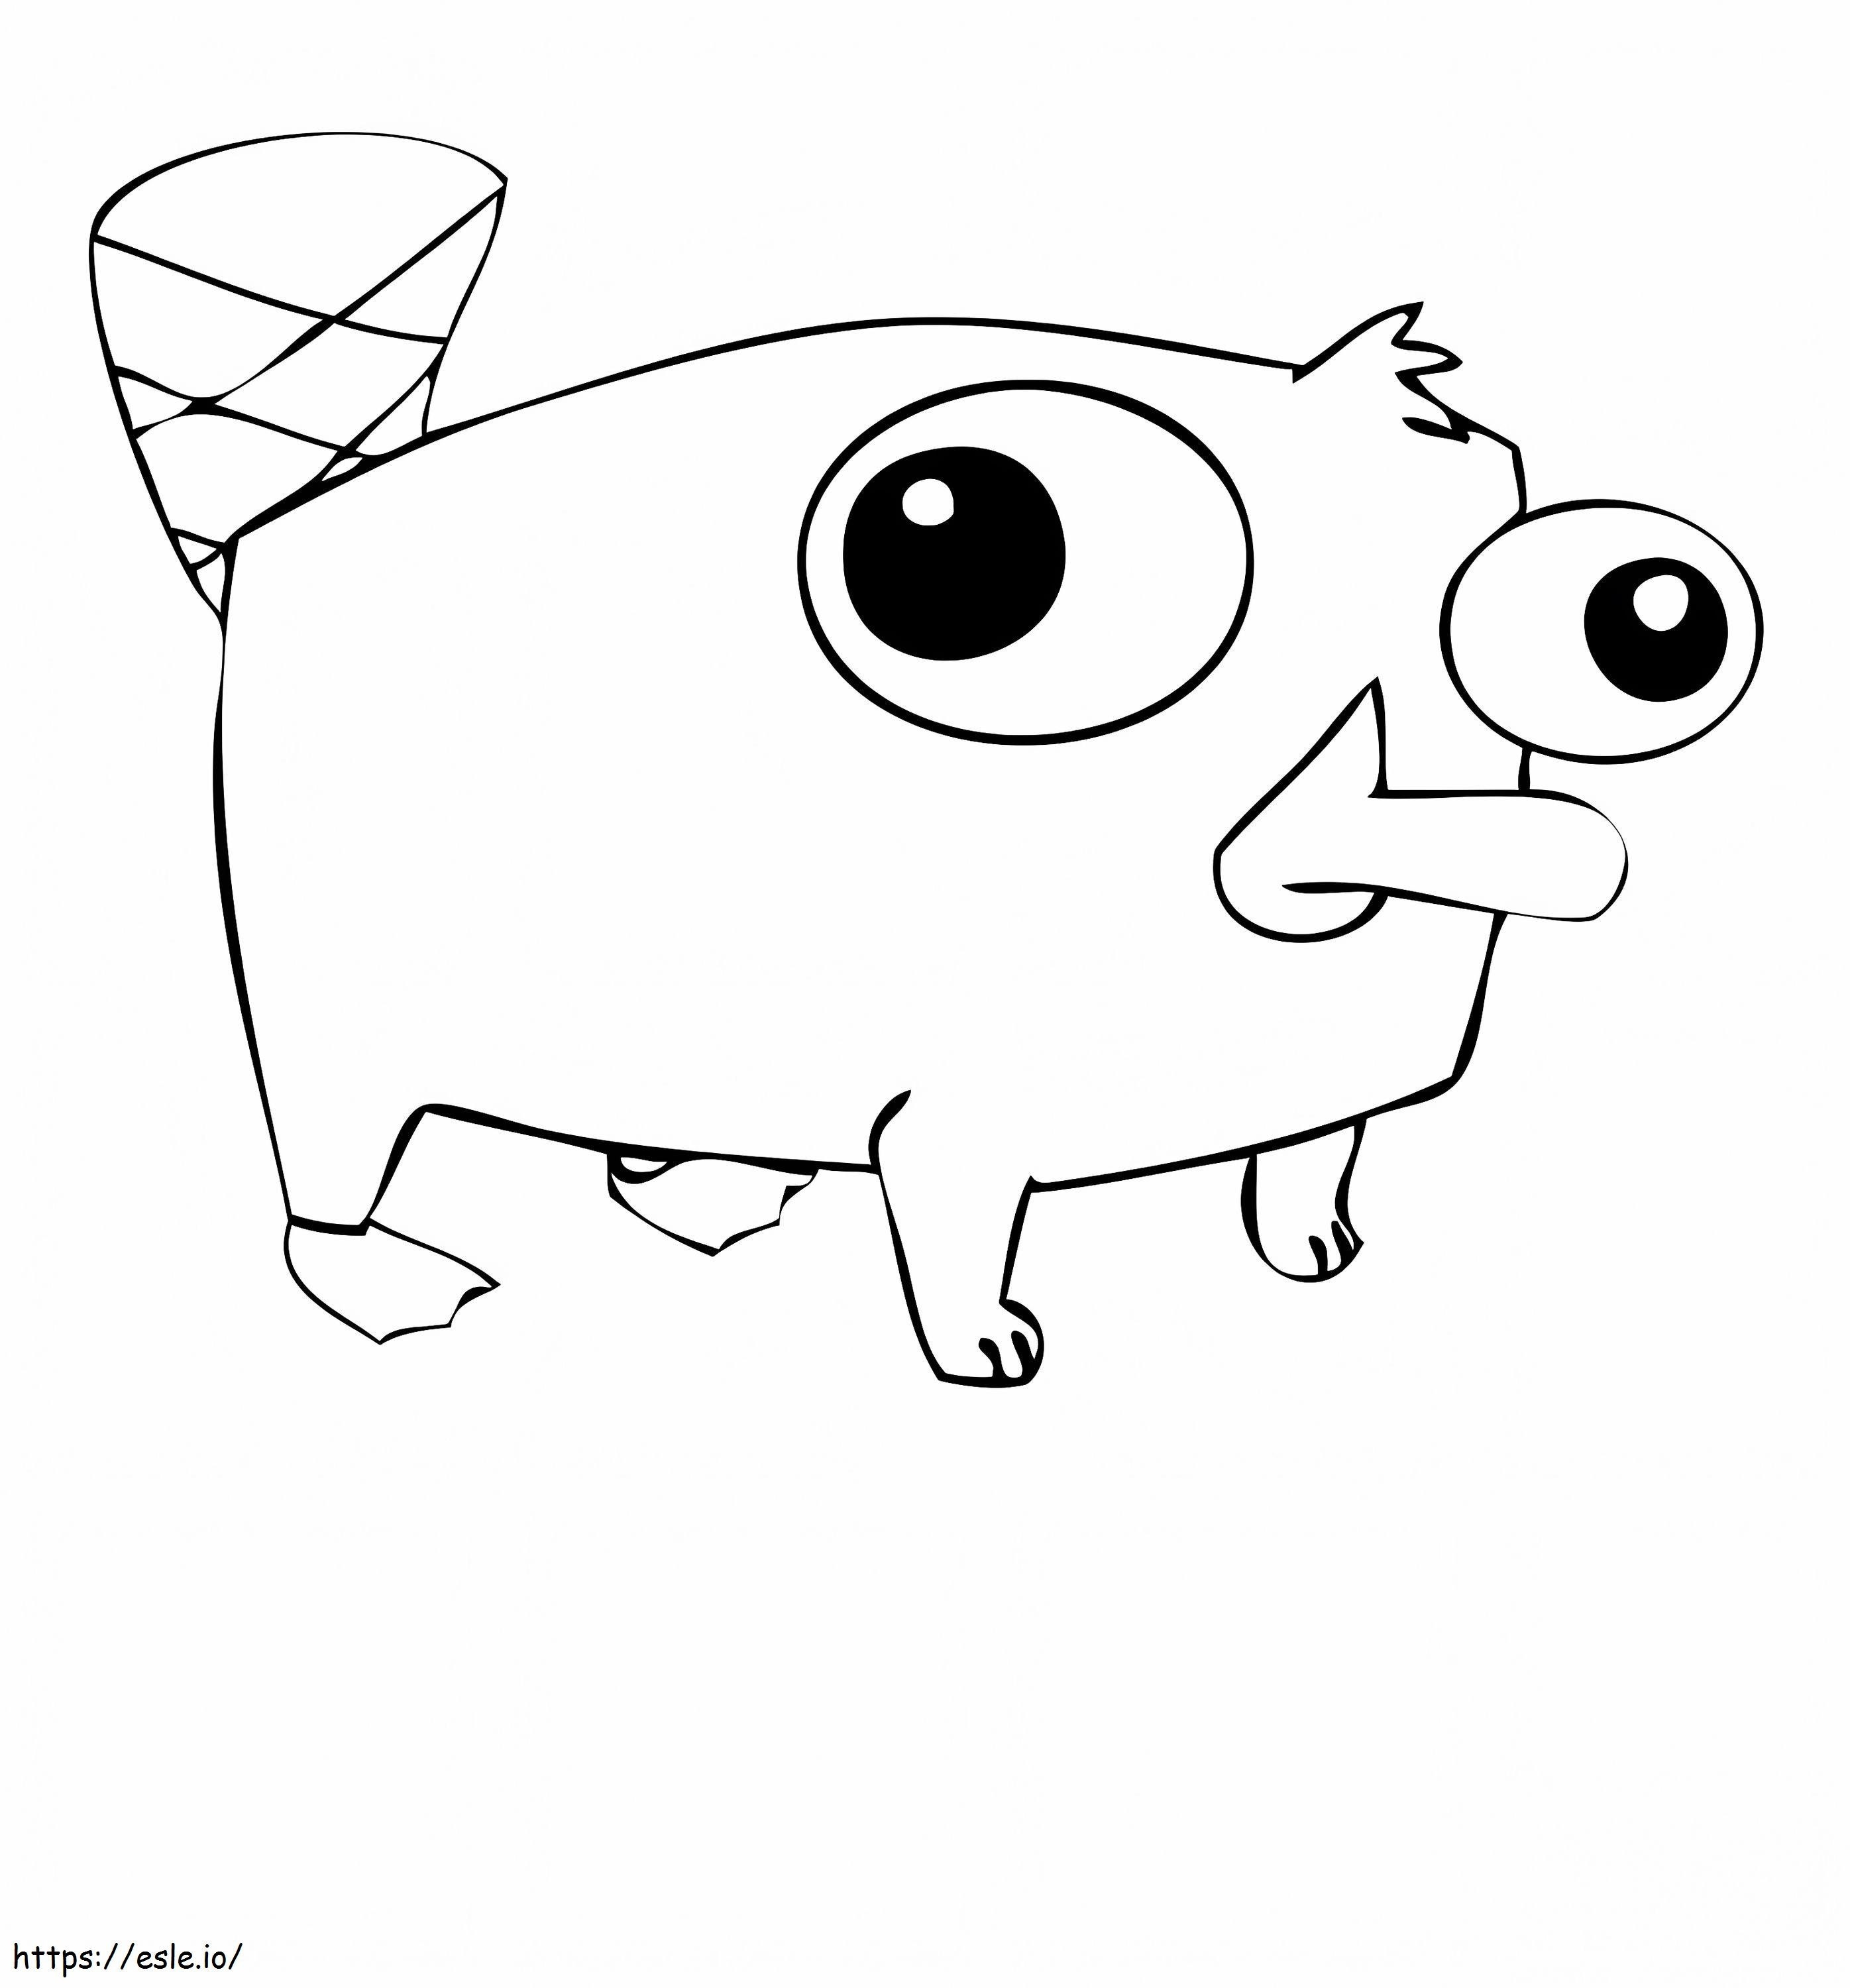 1559699312_Cute Perry A4 coloring page